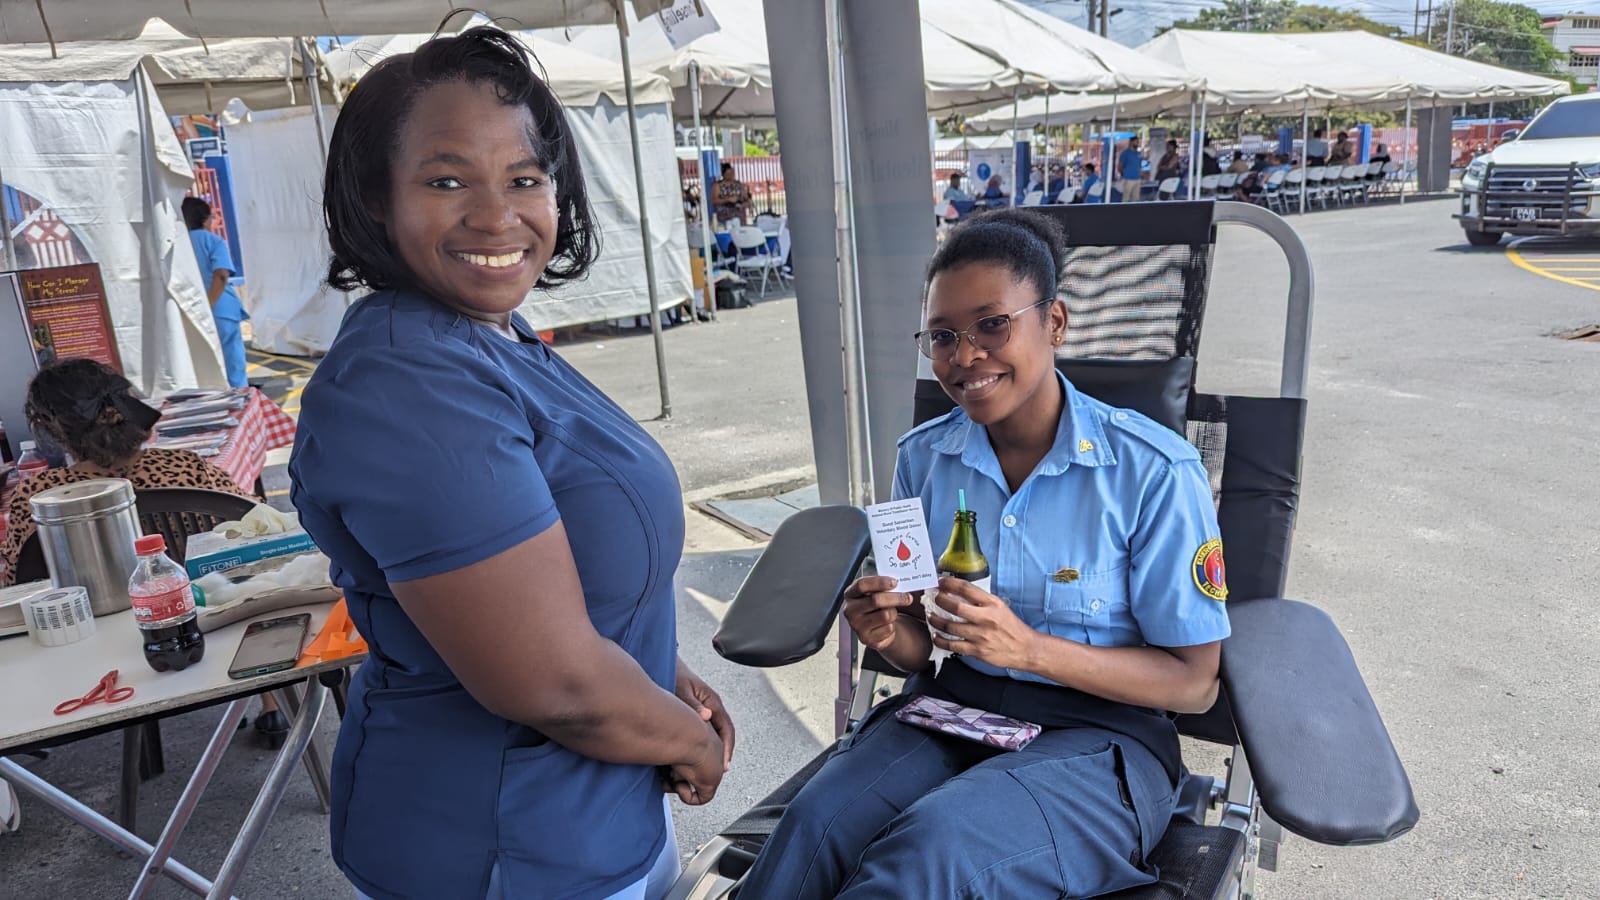 A women in blue medical scrub top stands while another women in collared uniform with a patch on the sleeve sits in a medical chair and holds up a paper card with a drawing of a blood drop on it.